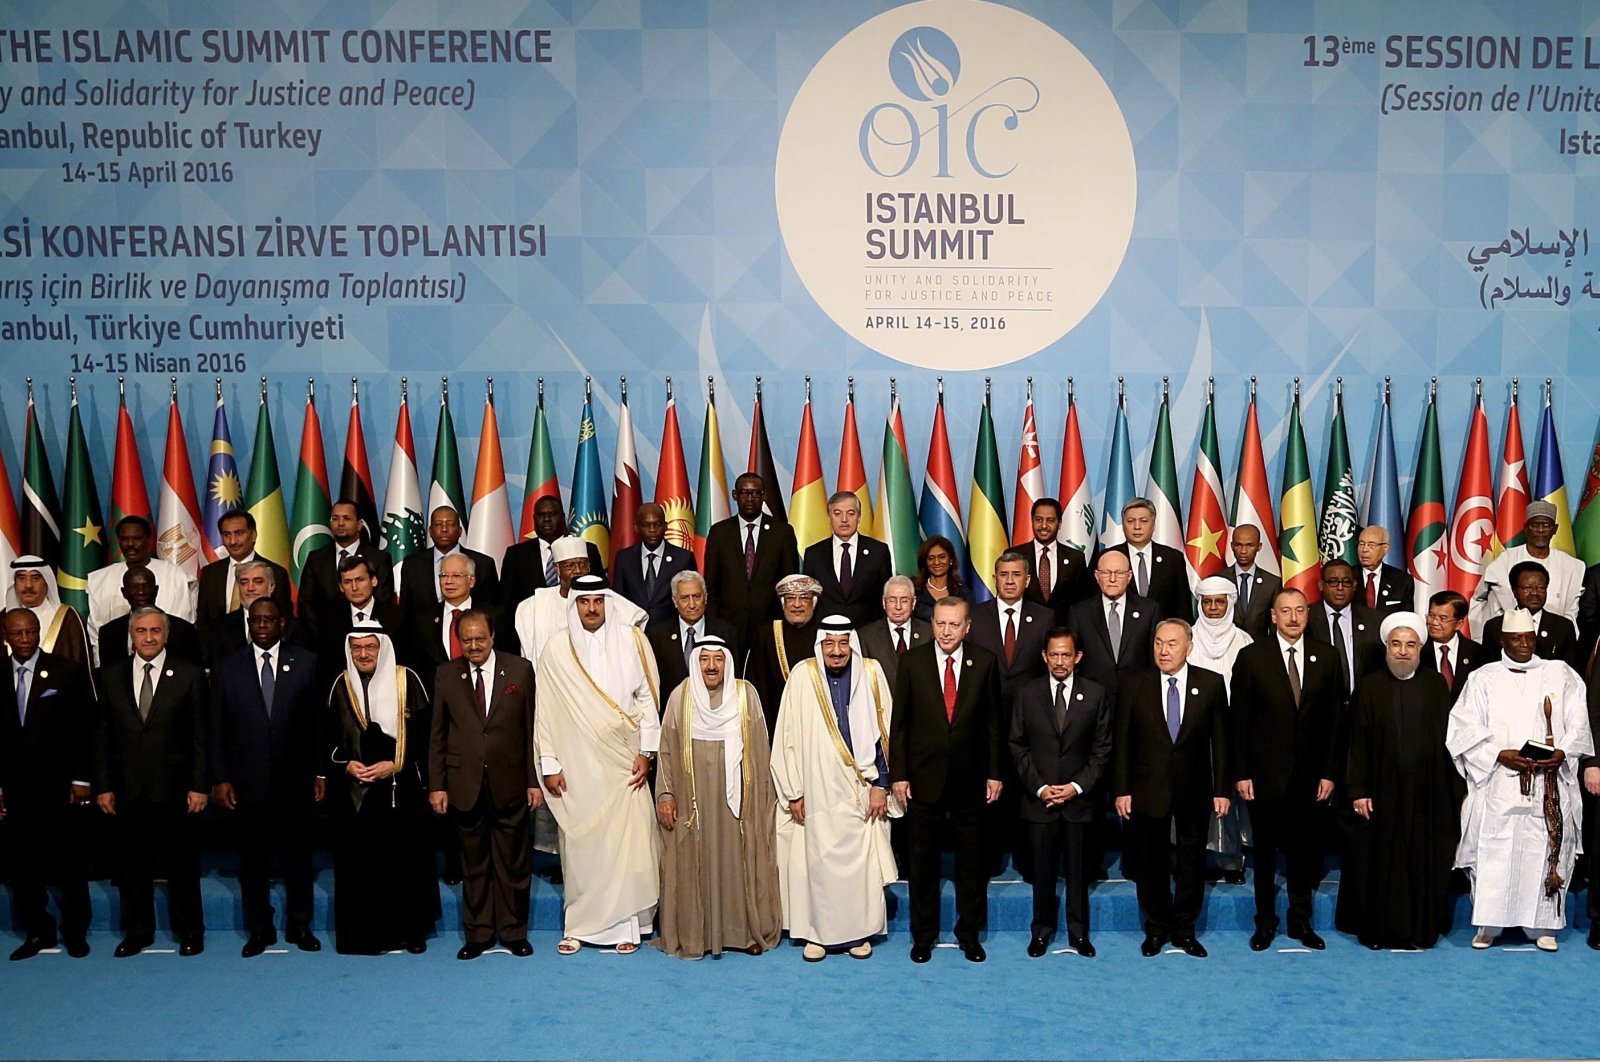 Leaders and representatives of Islamic countries pose for a family photo during the opening of the 13th Organization of Islamic Cooperation (OIC) summit in Istanbul, Turkey, April 14, 2016. (AP Photo)